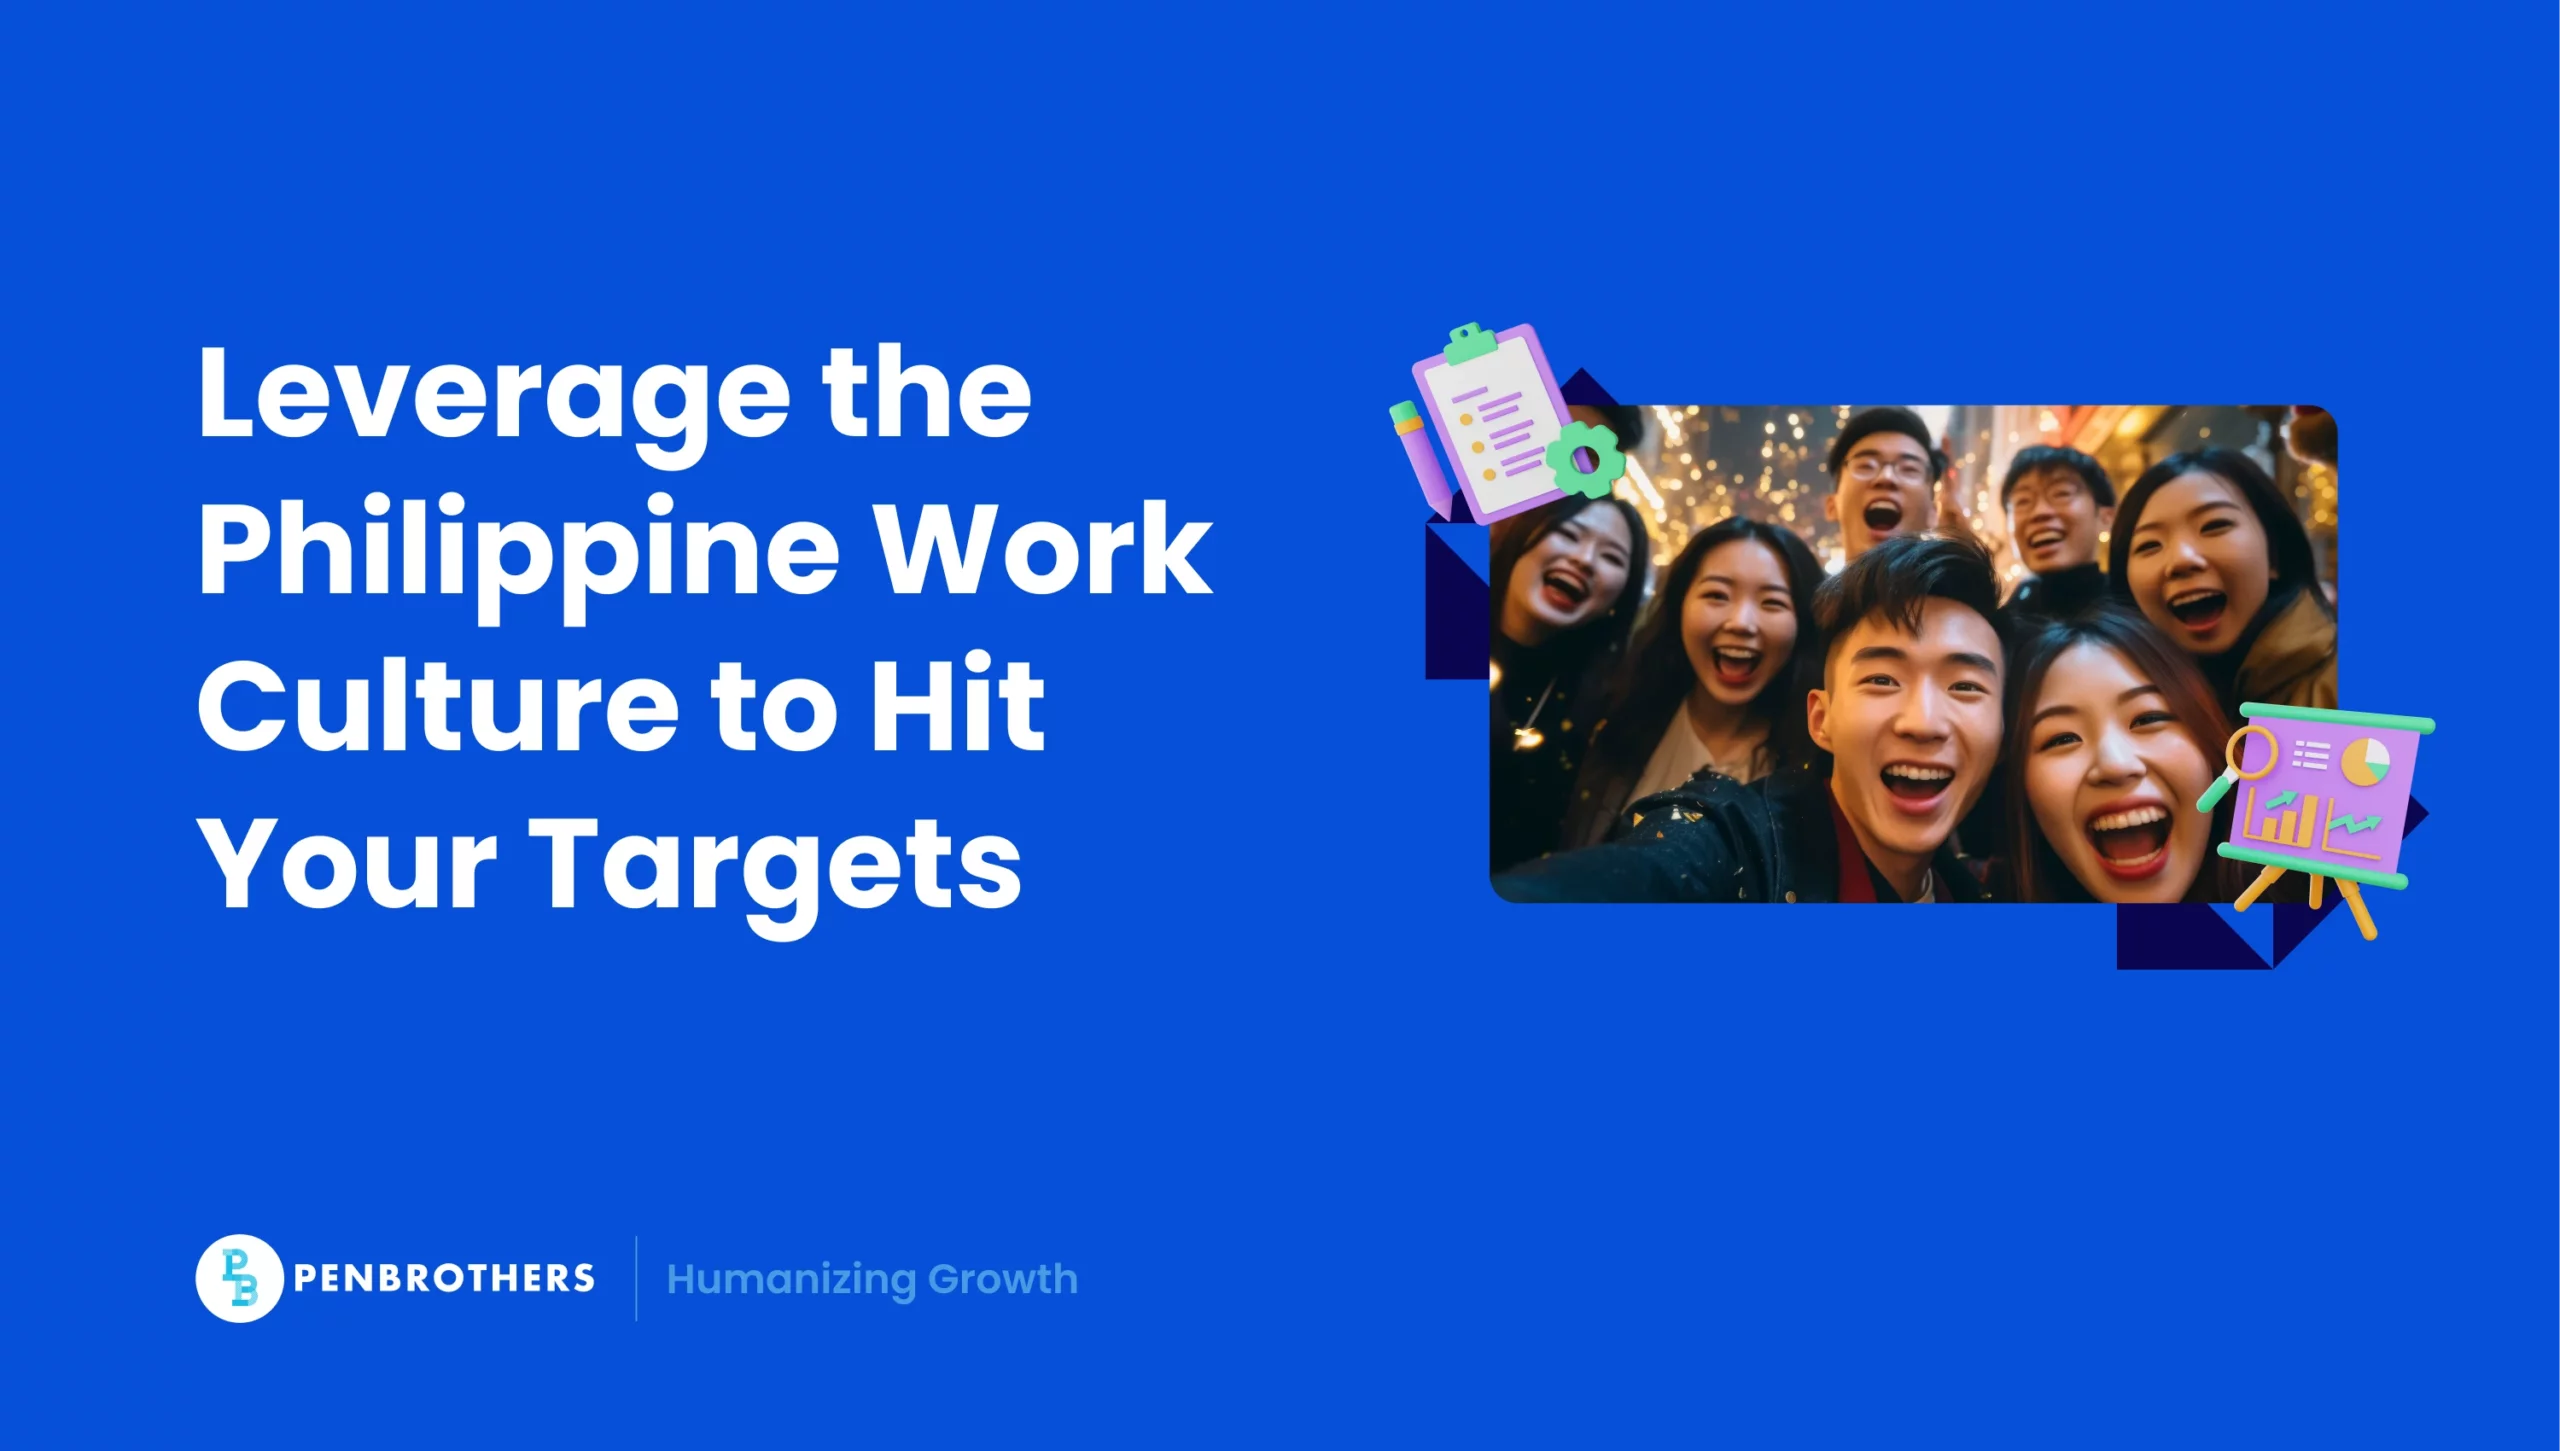 Leverage the Philippine Work Culture to Hit Your Business Targets